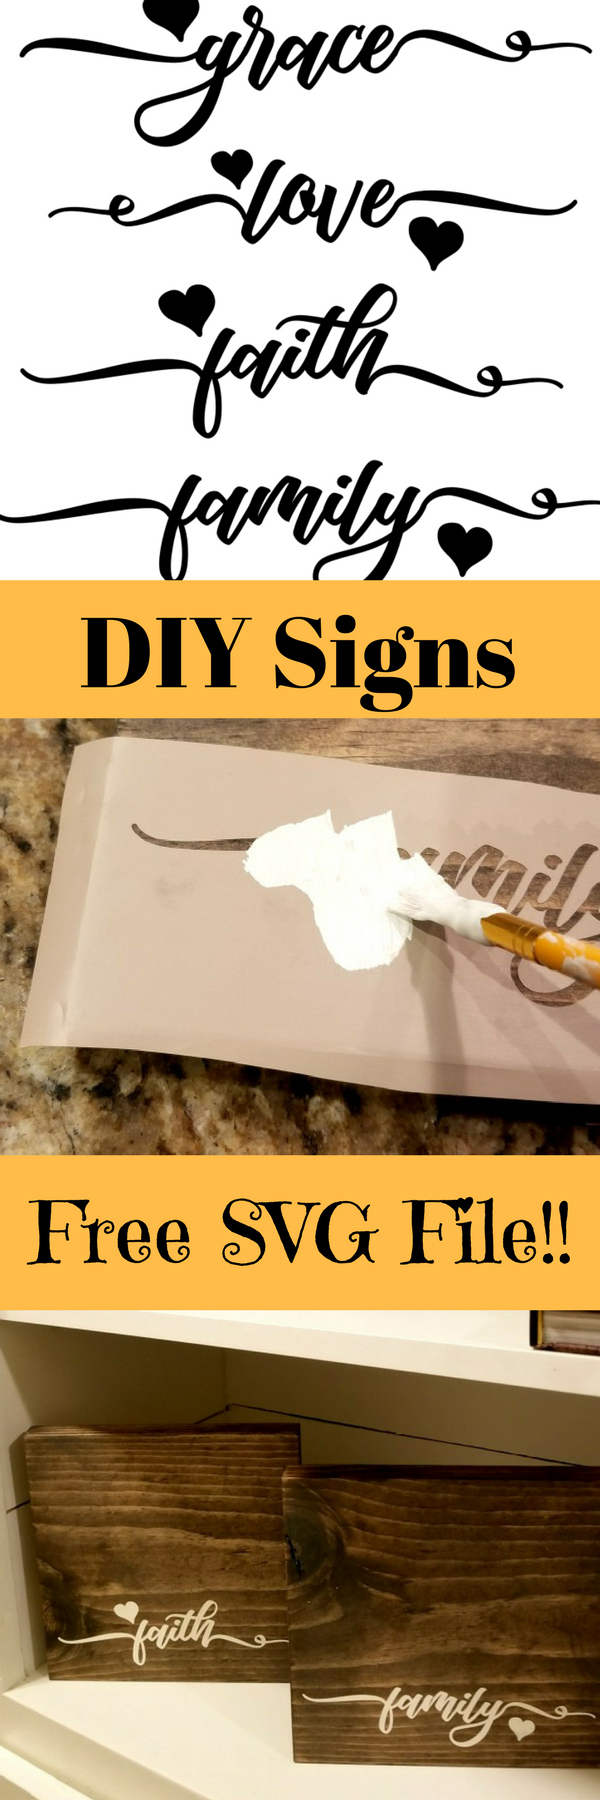 DIY wooden signs with sayings